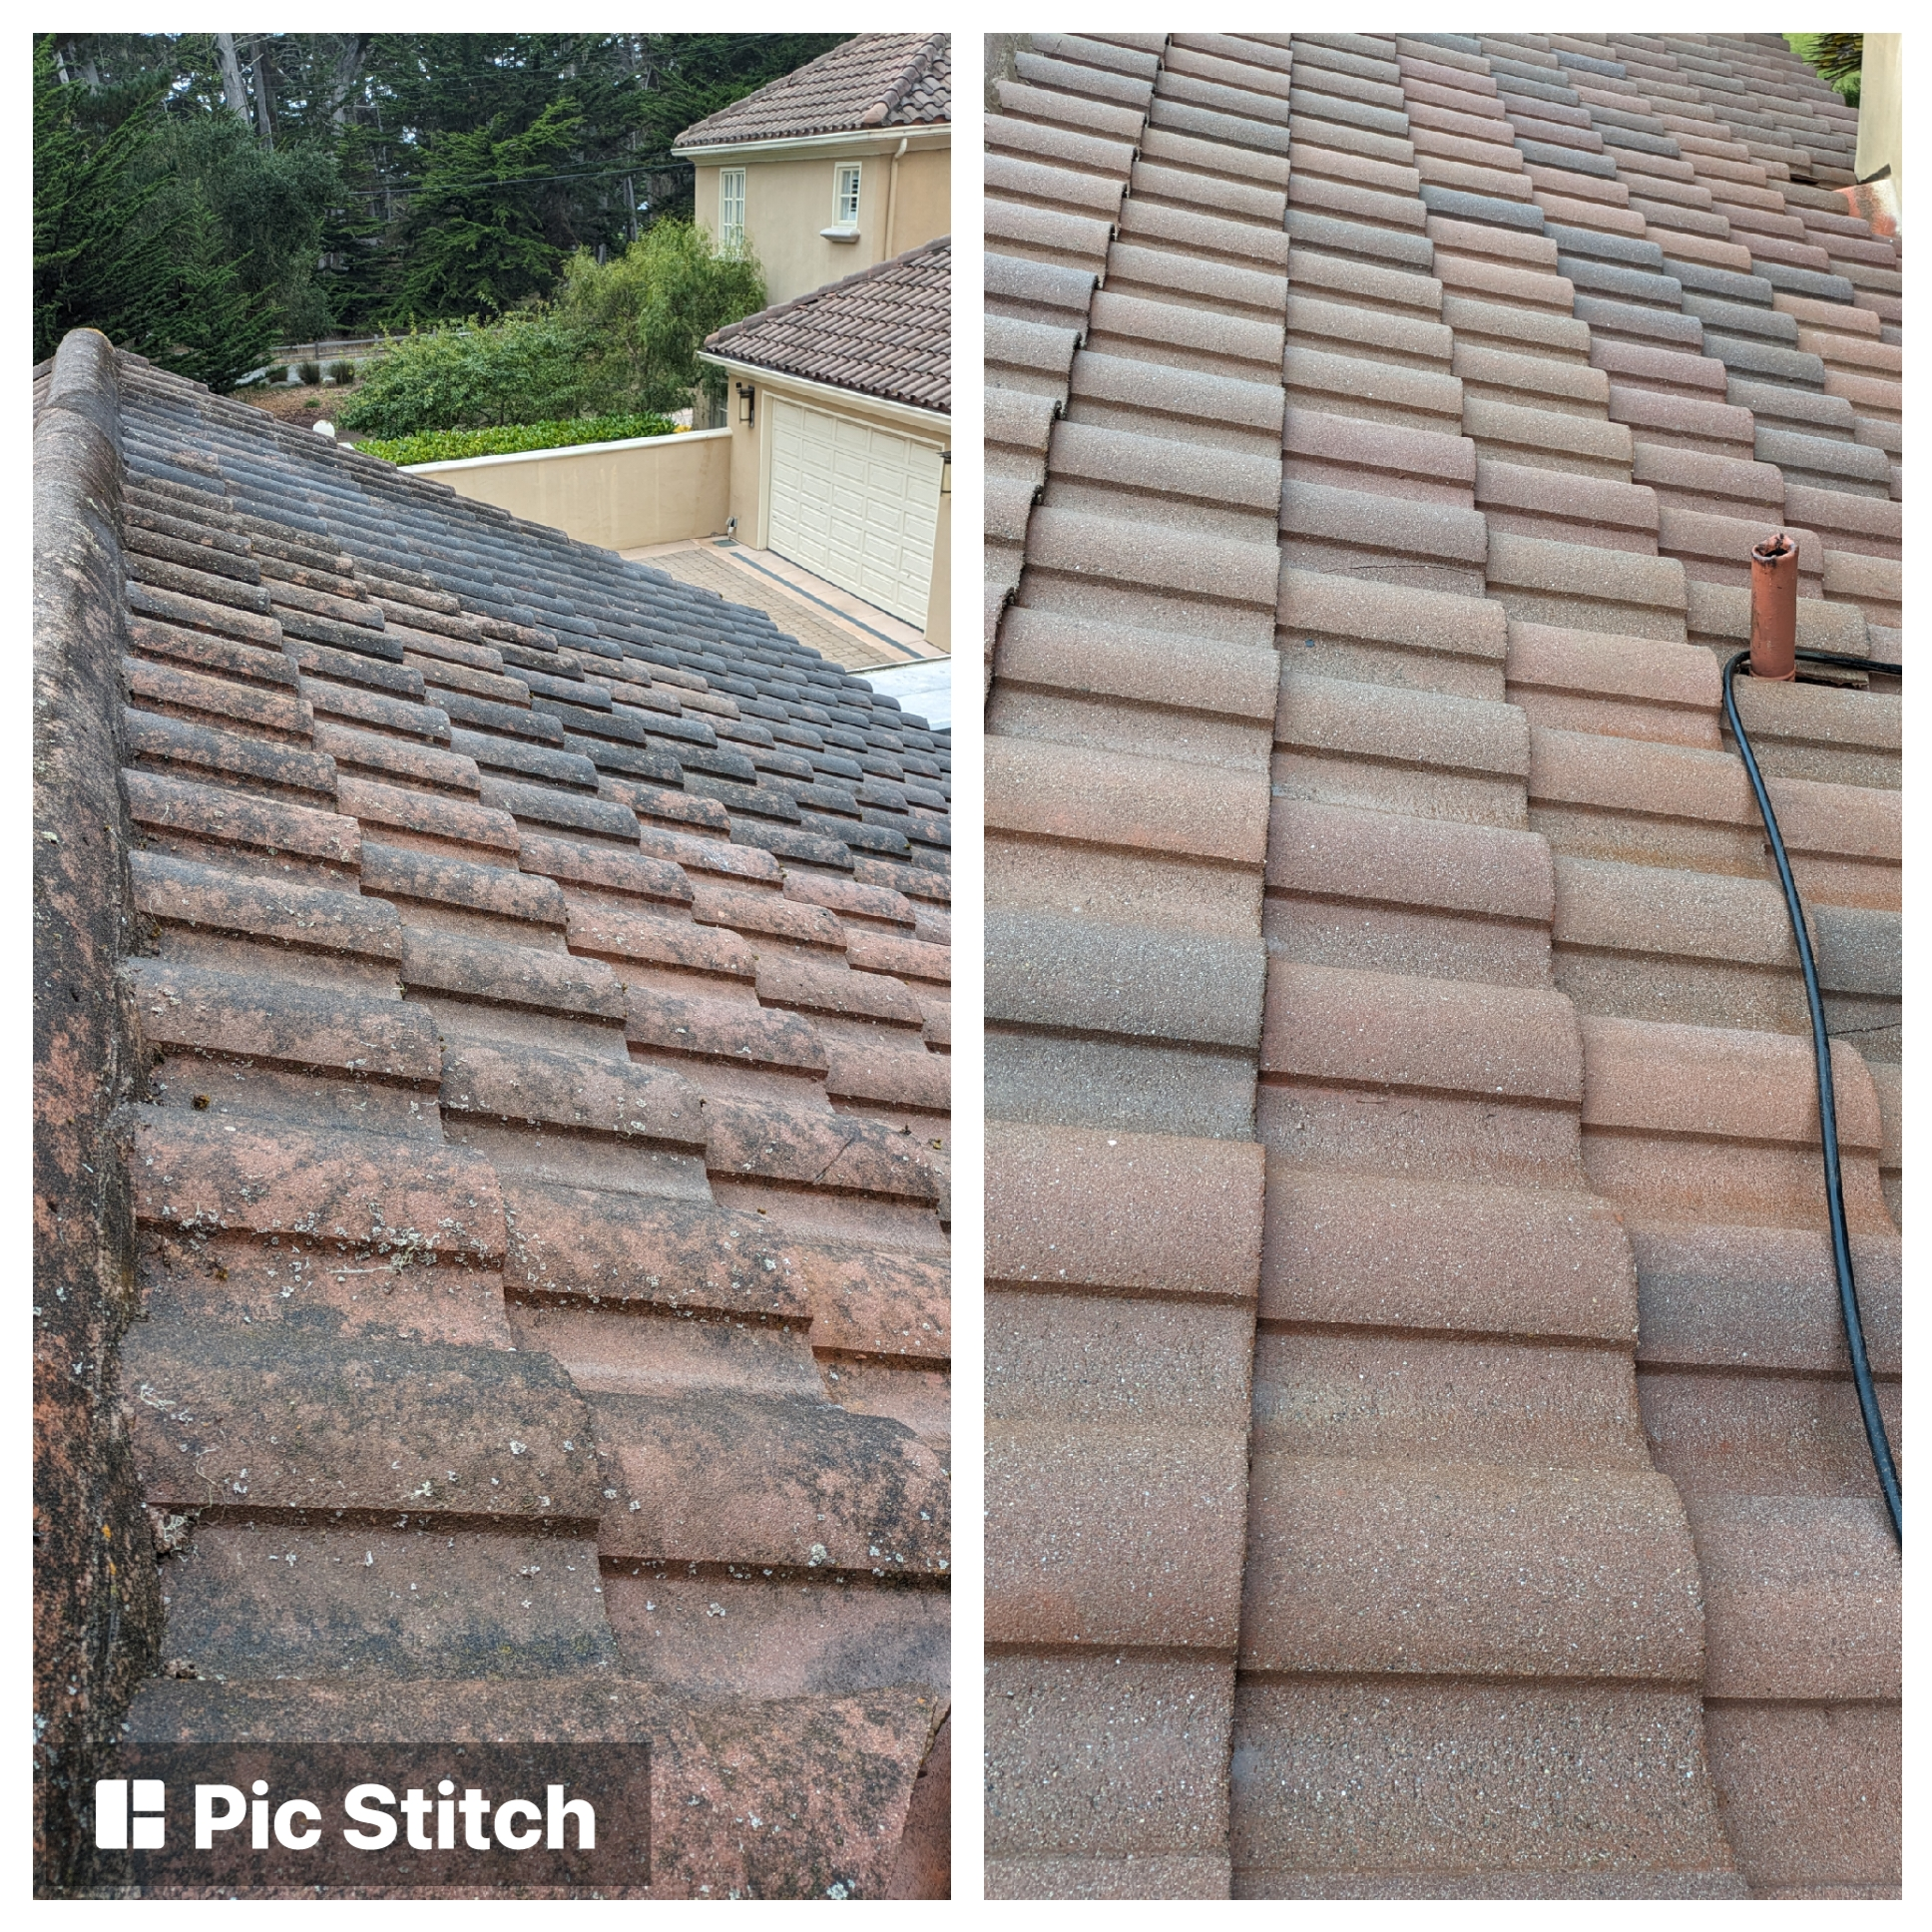 Tile roof cleaning in Pebble Beach, California